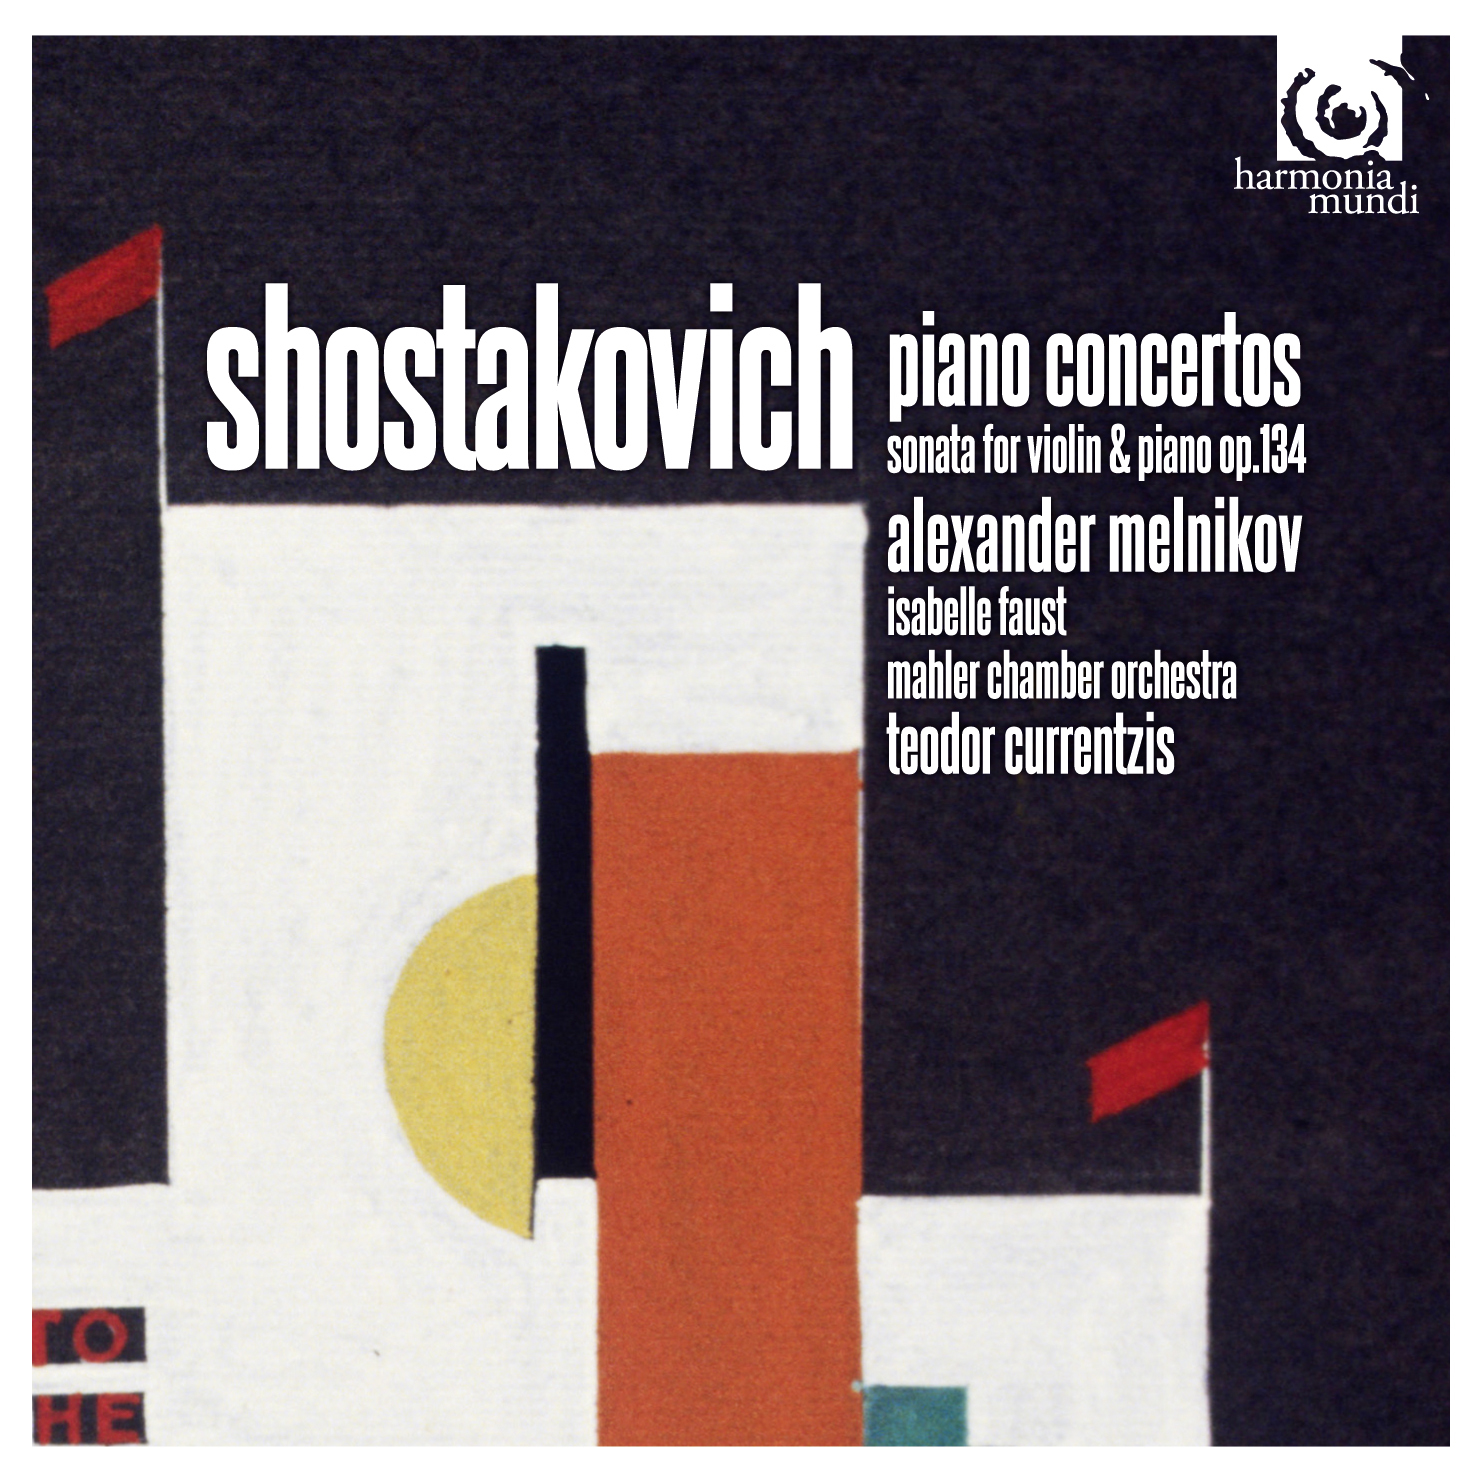 Concerto for Piano, Trumpet and String orchestra Op. 35 in C Minor: III. Moderato